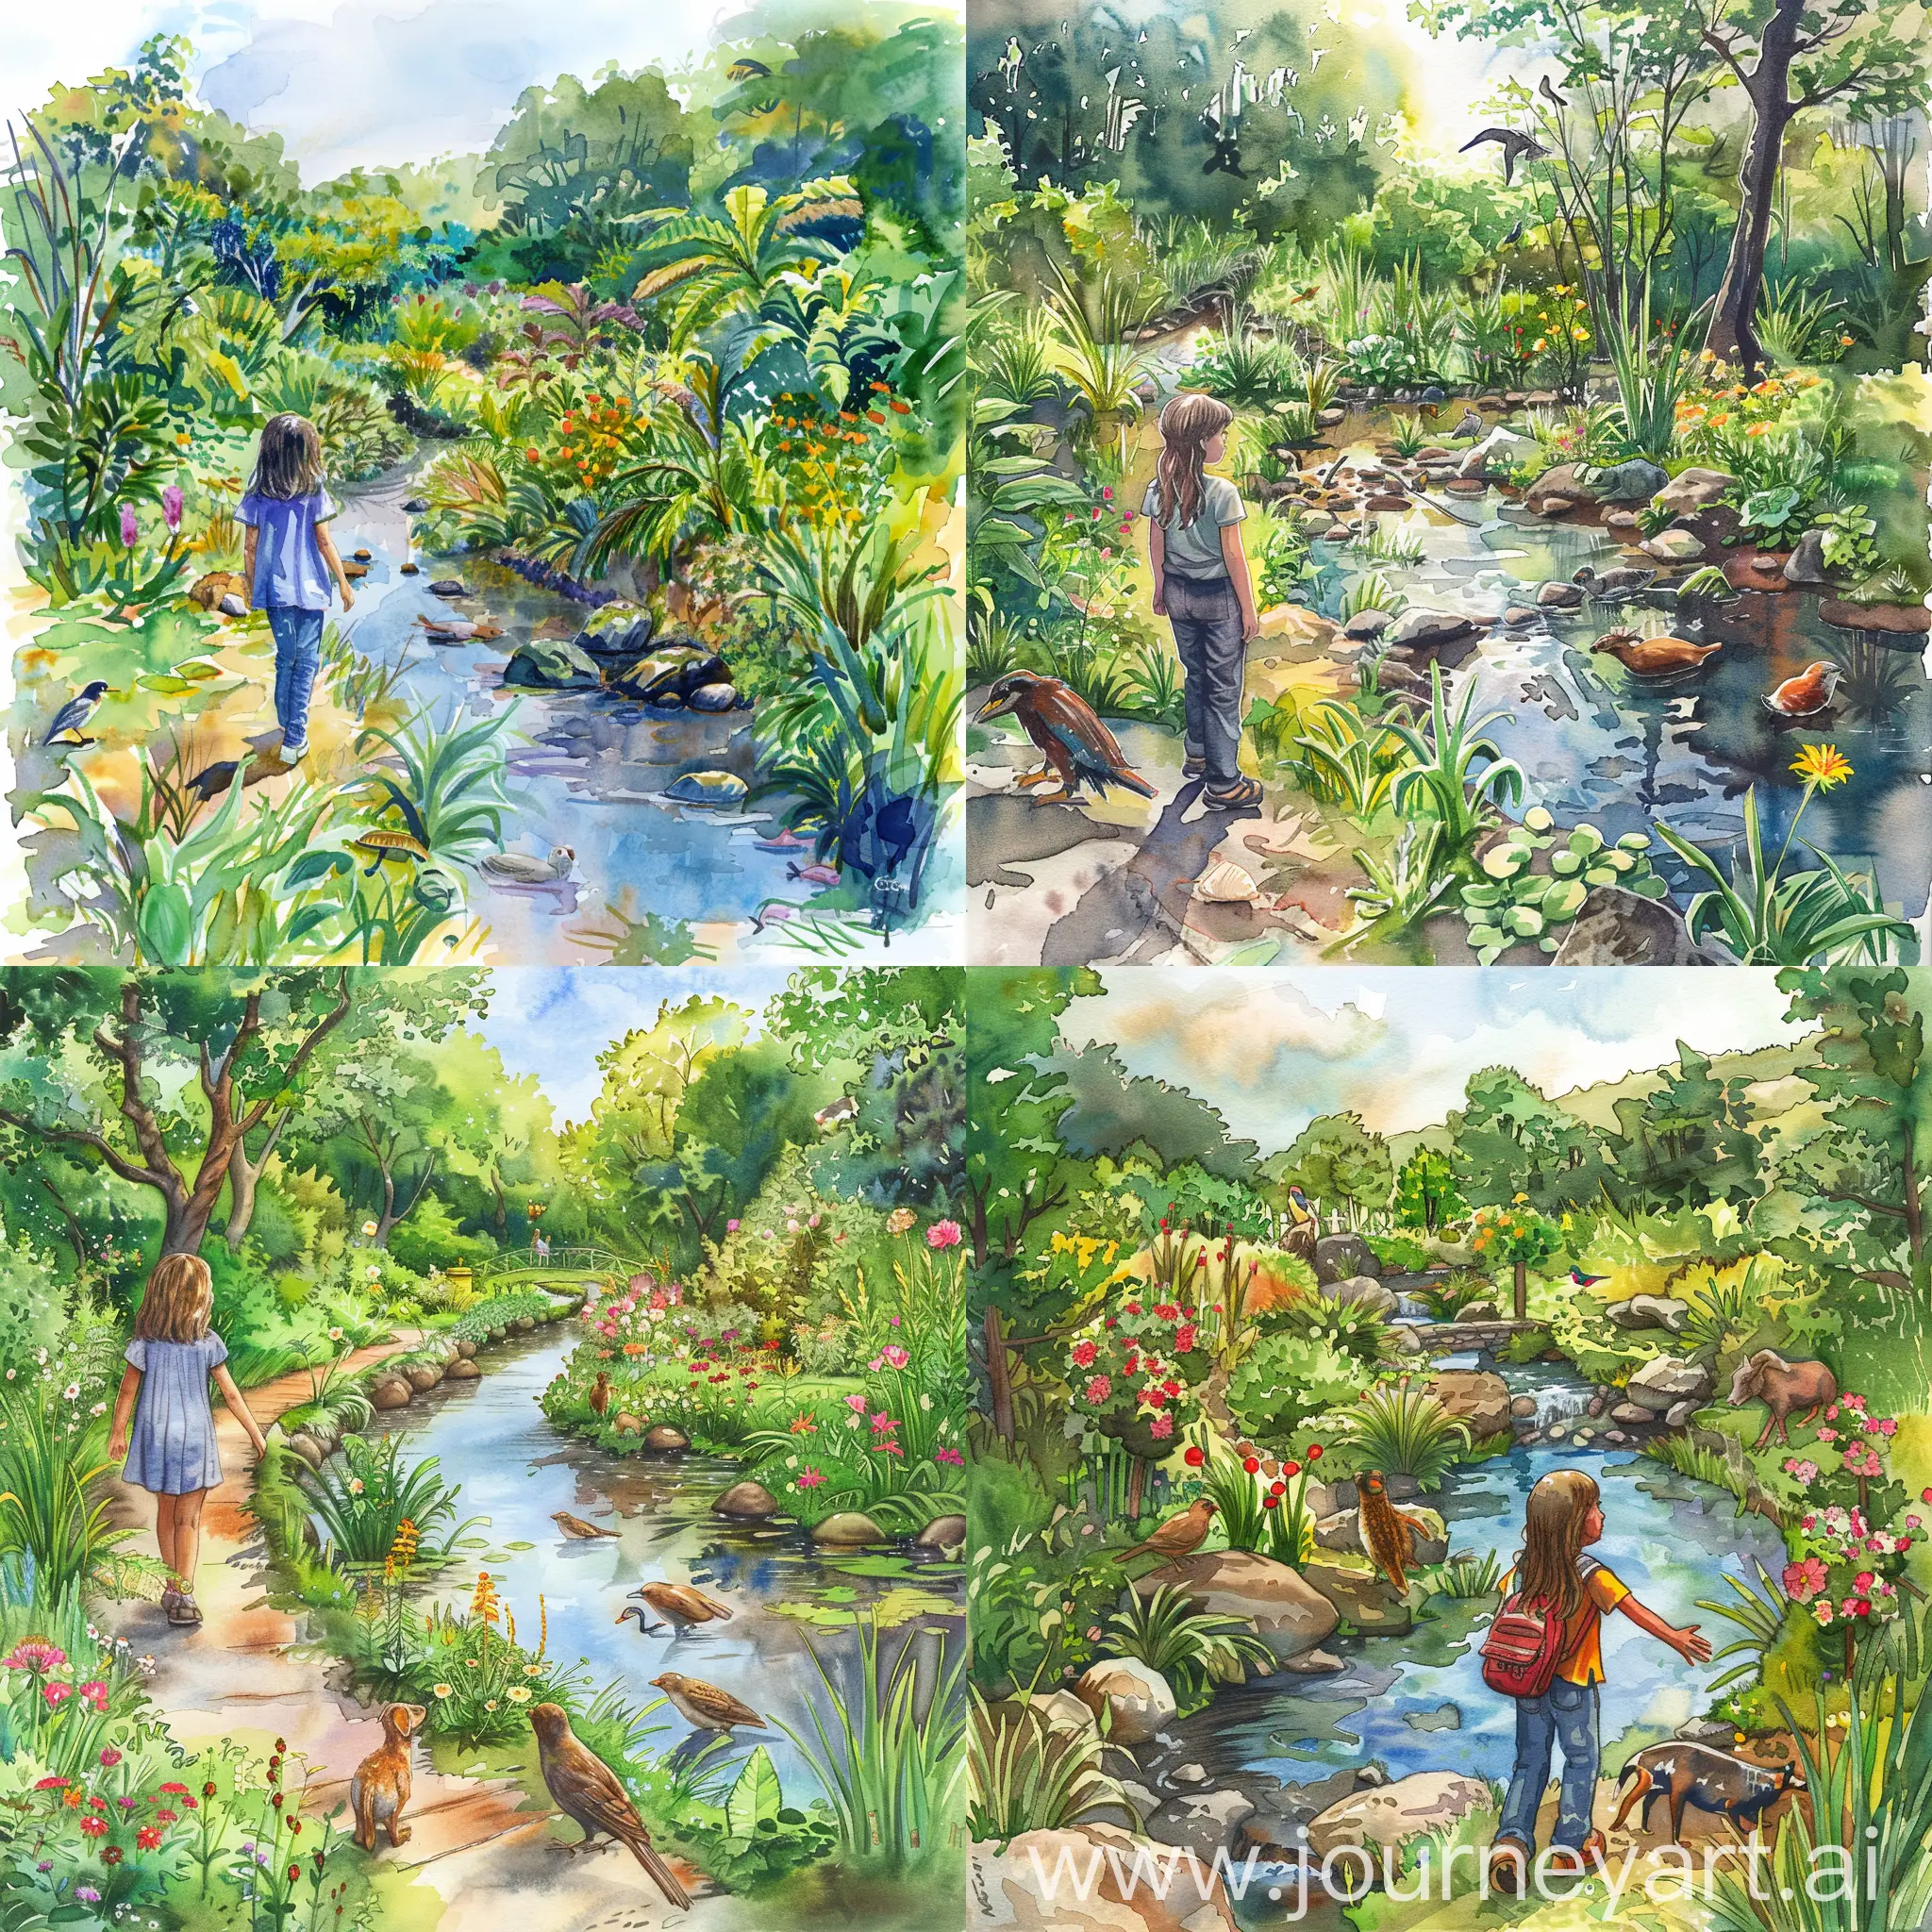 A young girl strolling daily through vibrant gardens by a serene stream, observing diverse animals and birds, radiating a sense of fulfillment and purpose in her role of guiding citizens towards preservation efforts, Illustration, watercolor painting, capturing the lush scenery and the girl's dedication, 